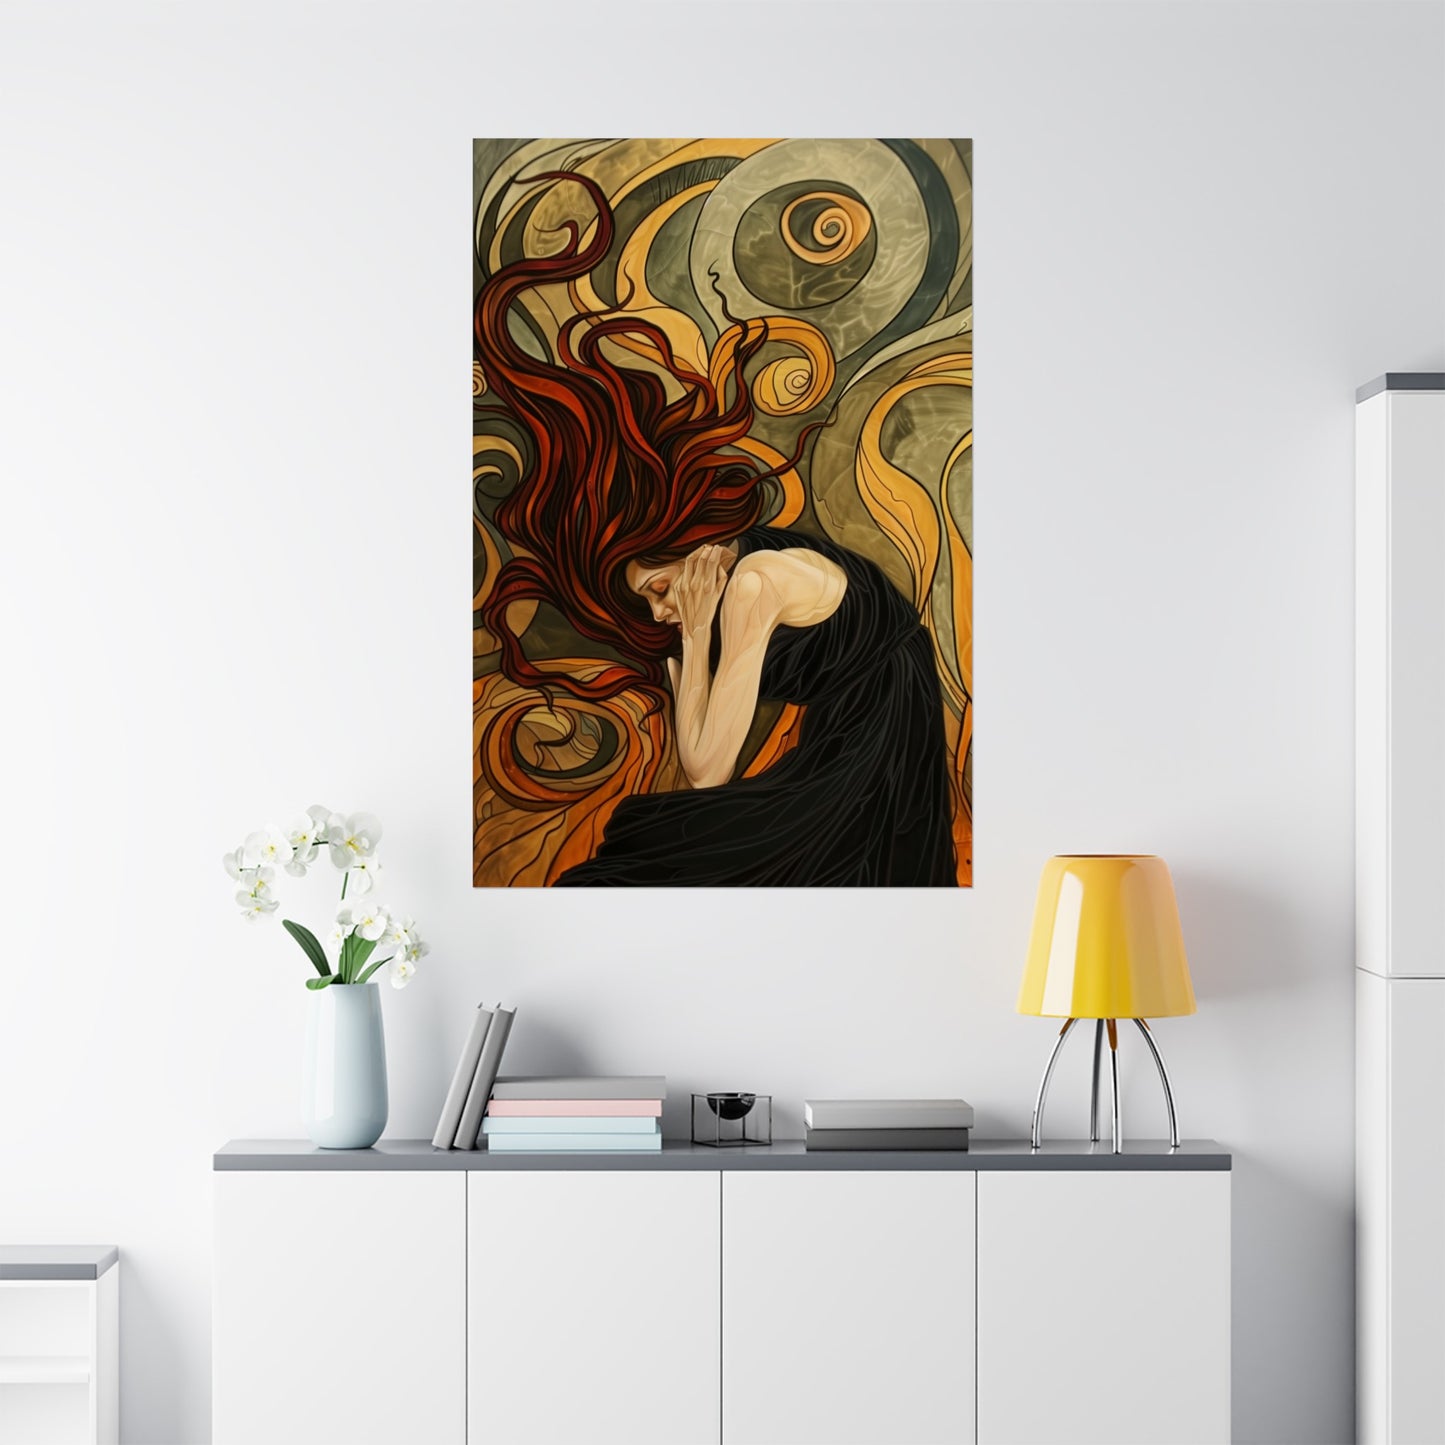 Pure Frustration Matte Wall Art Poster for Home Office or Dorm Decor